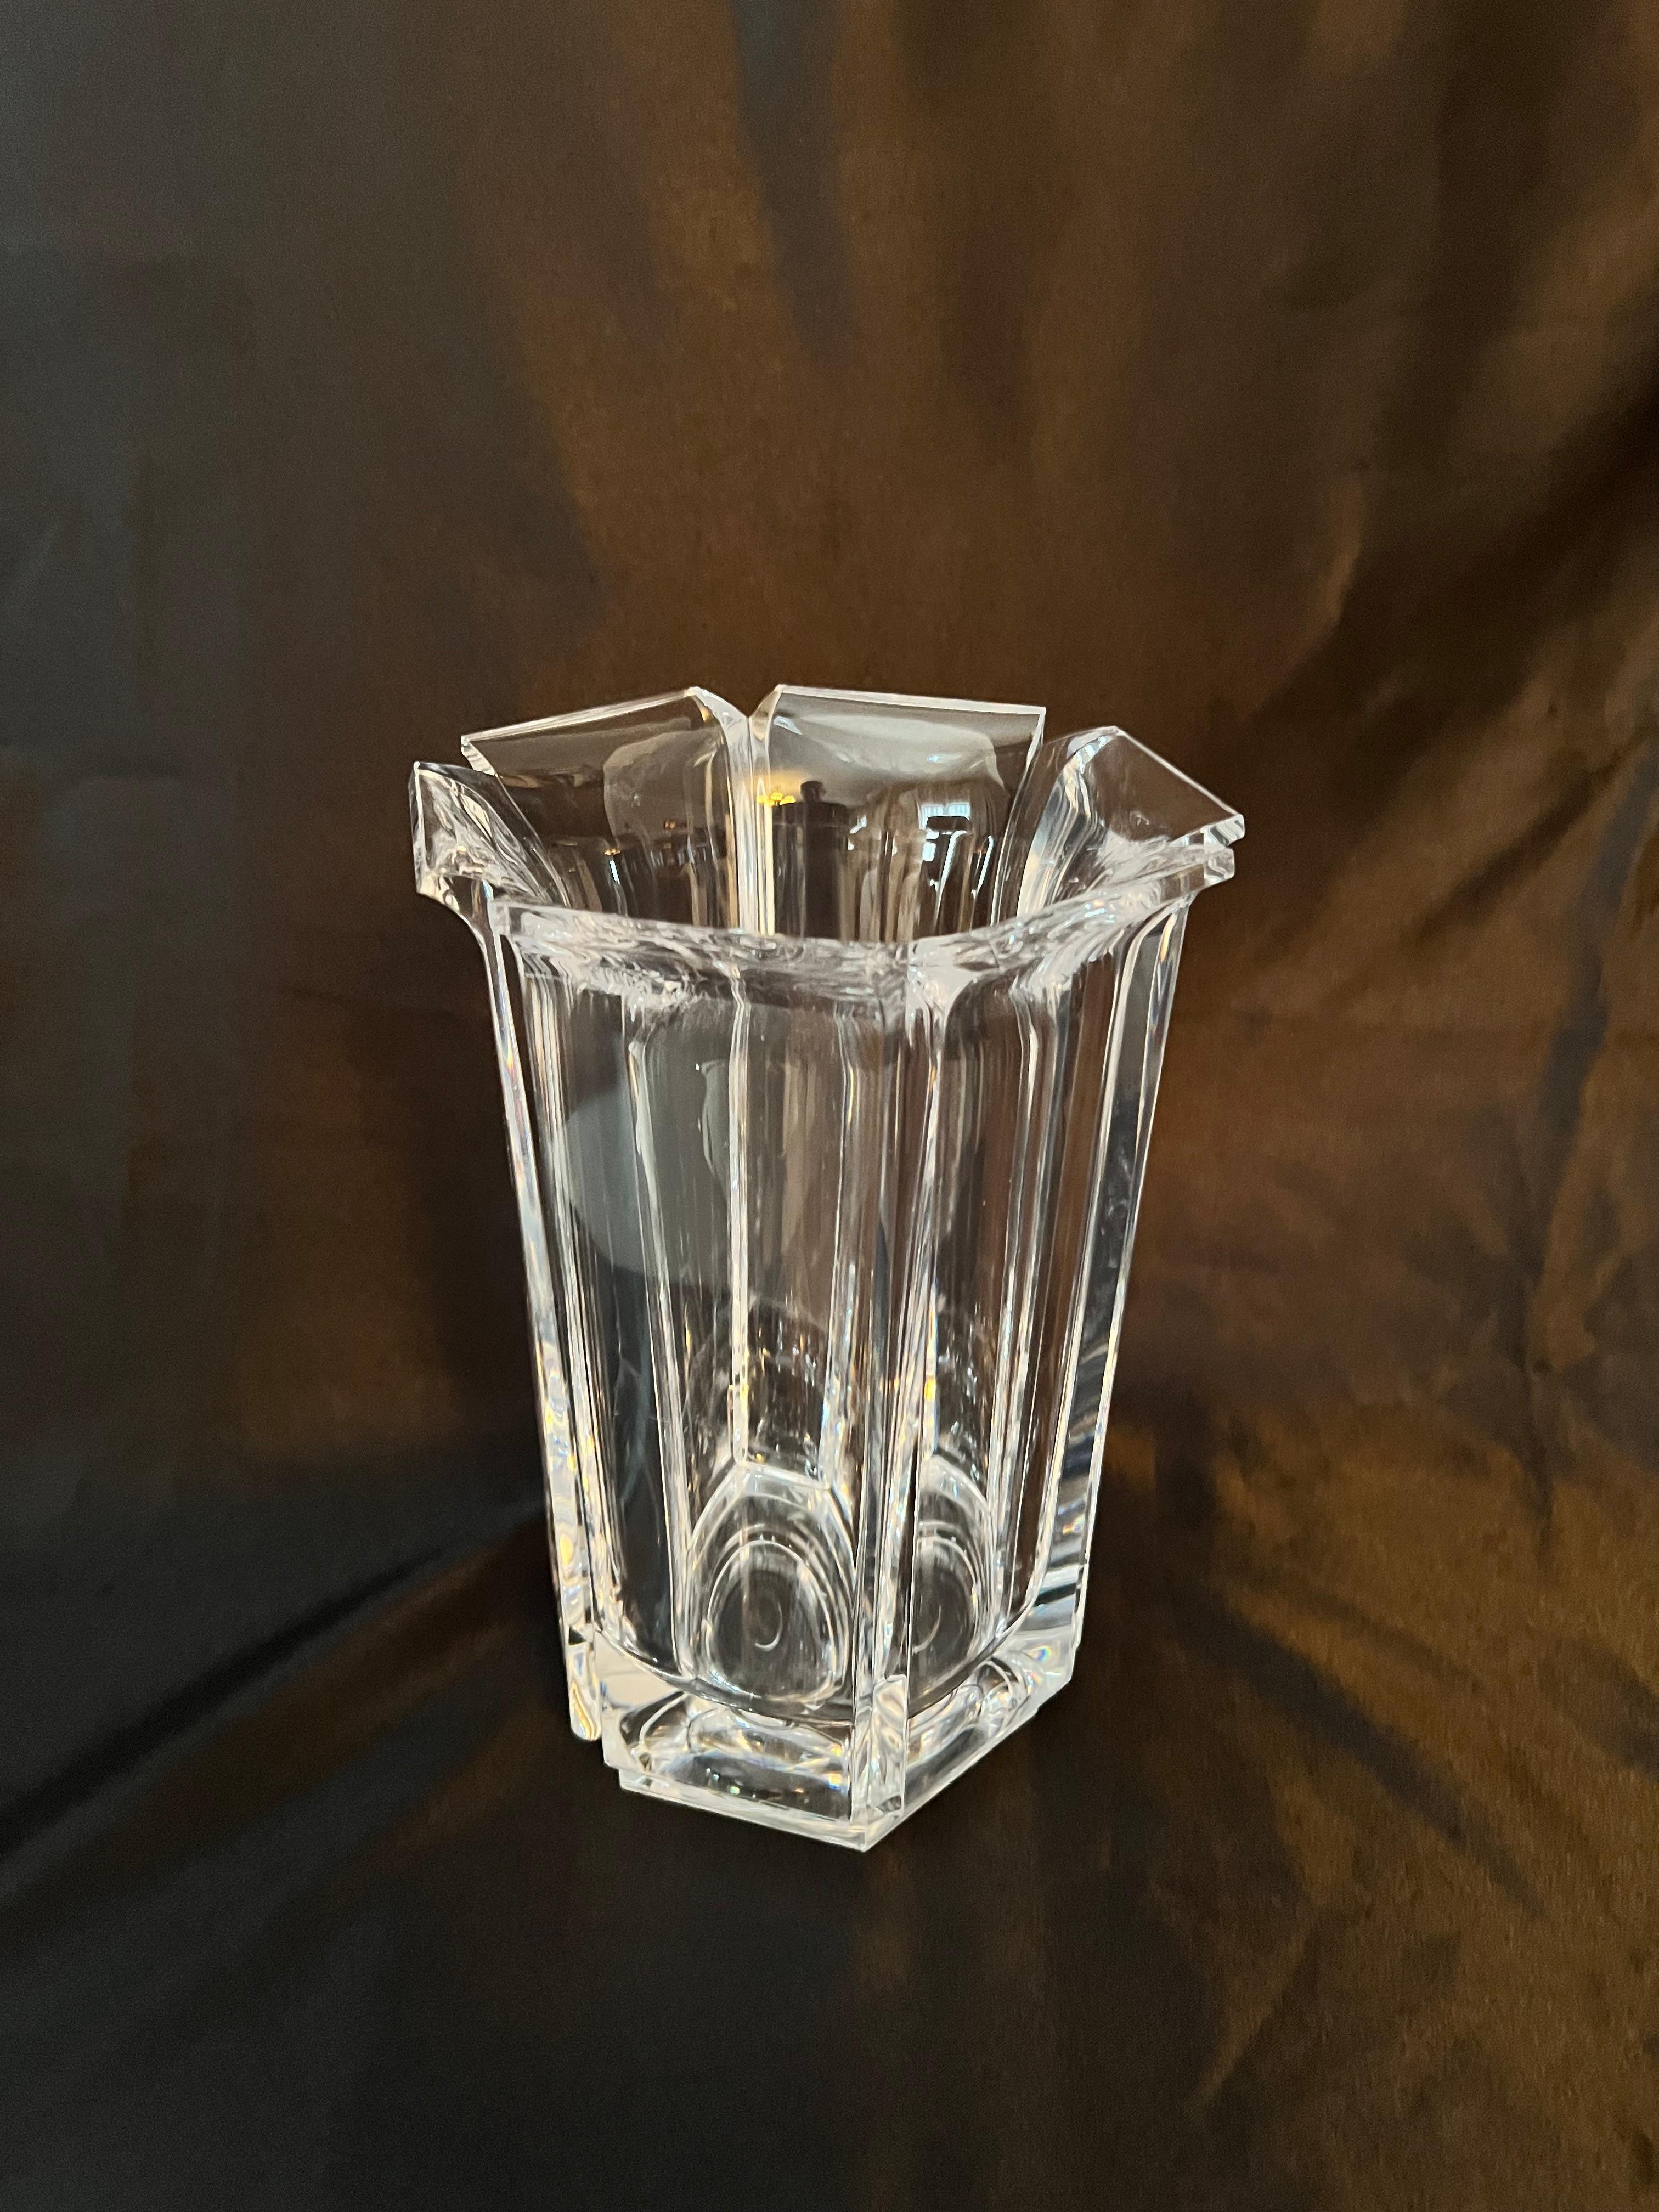 A wonderful hexagon acrylic piece, unique in shape and in very good condition.  The piece looks like glass or crystal but is acrylic.  As good a champagne or wine chiller as a vase - multi-faceted and a dynamic look,

Light weight but a lot of look